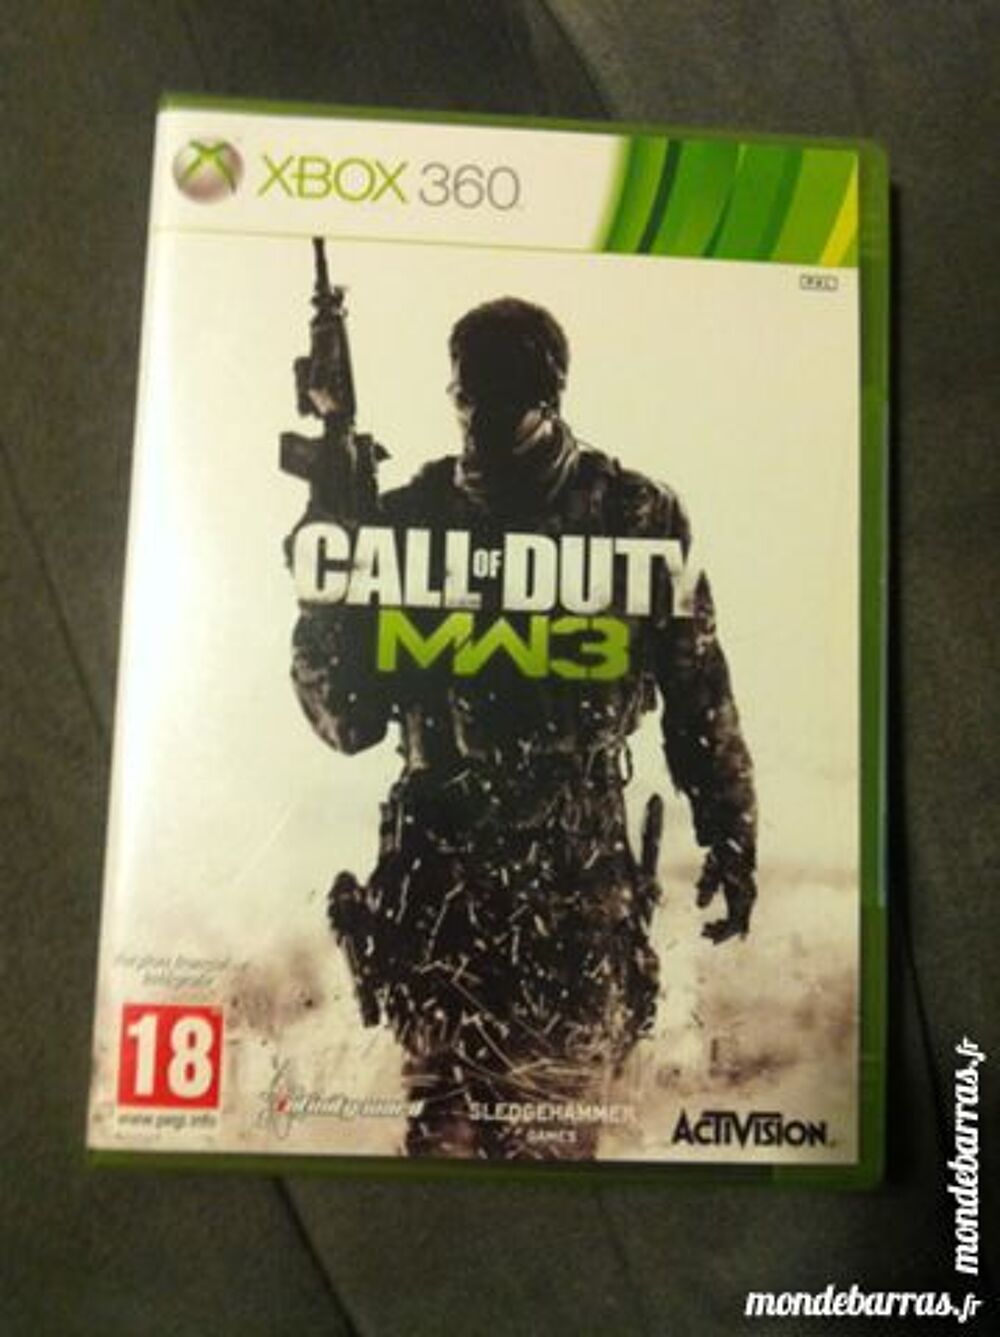 Call Of Duty Modern Warfare 3 XBOX 360 Neuf Consoles et jeux vidos